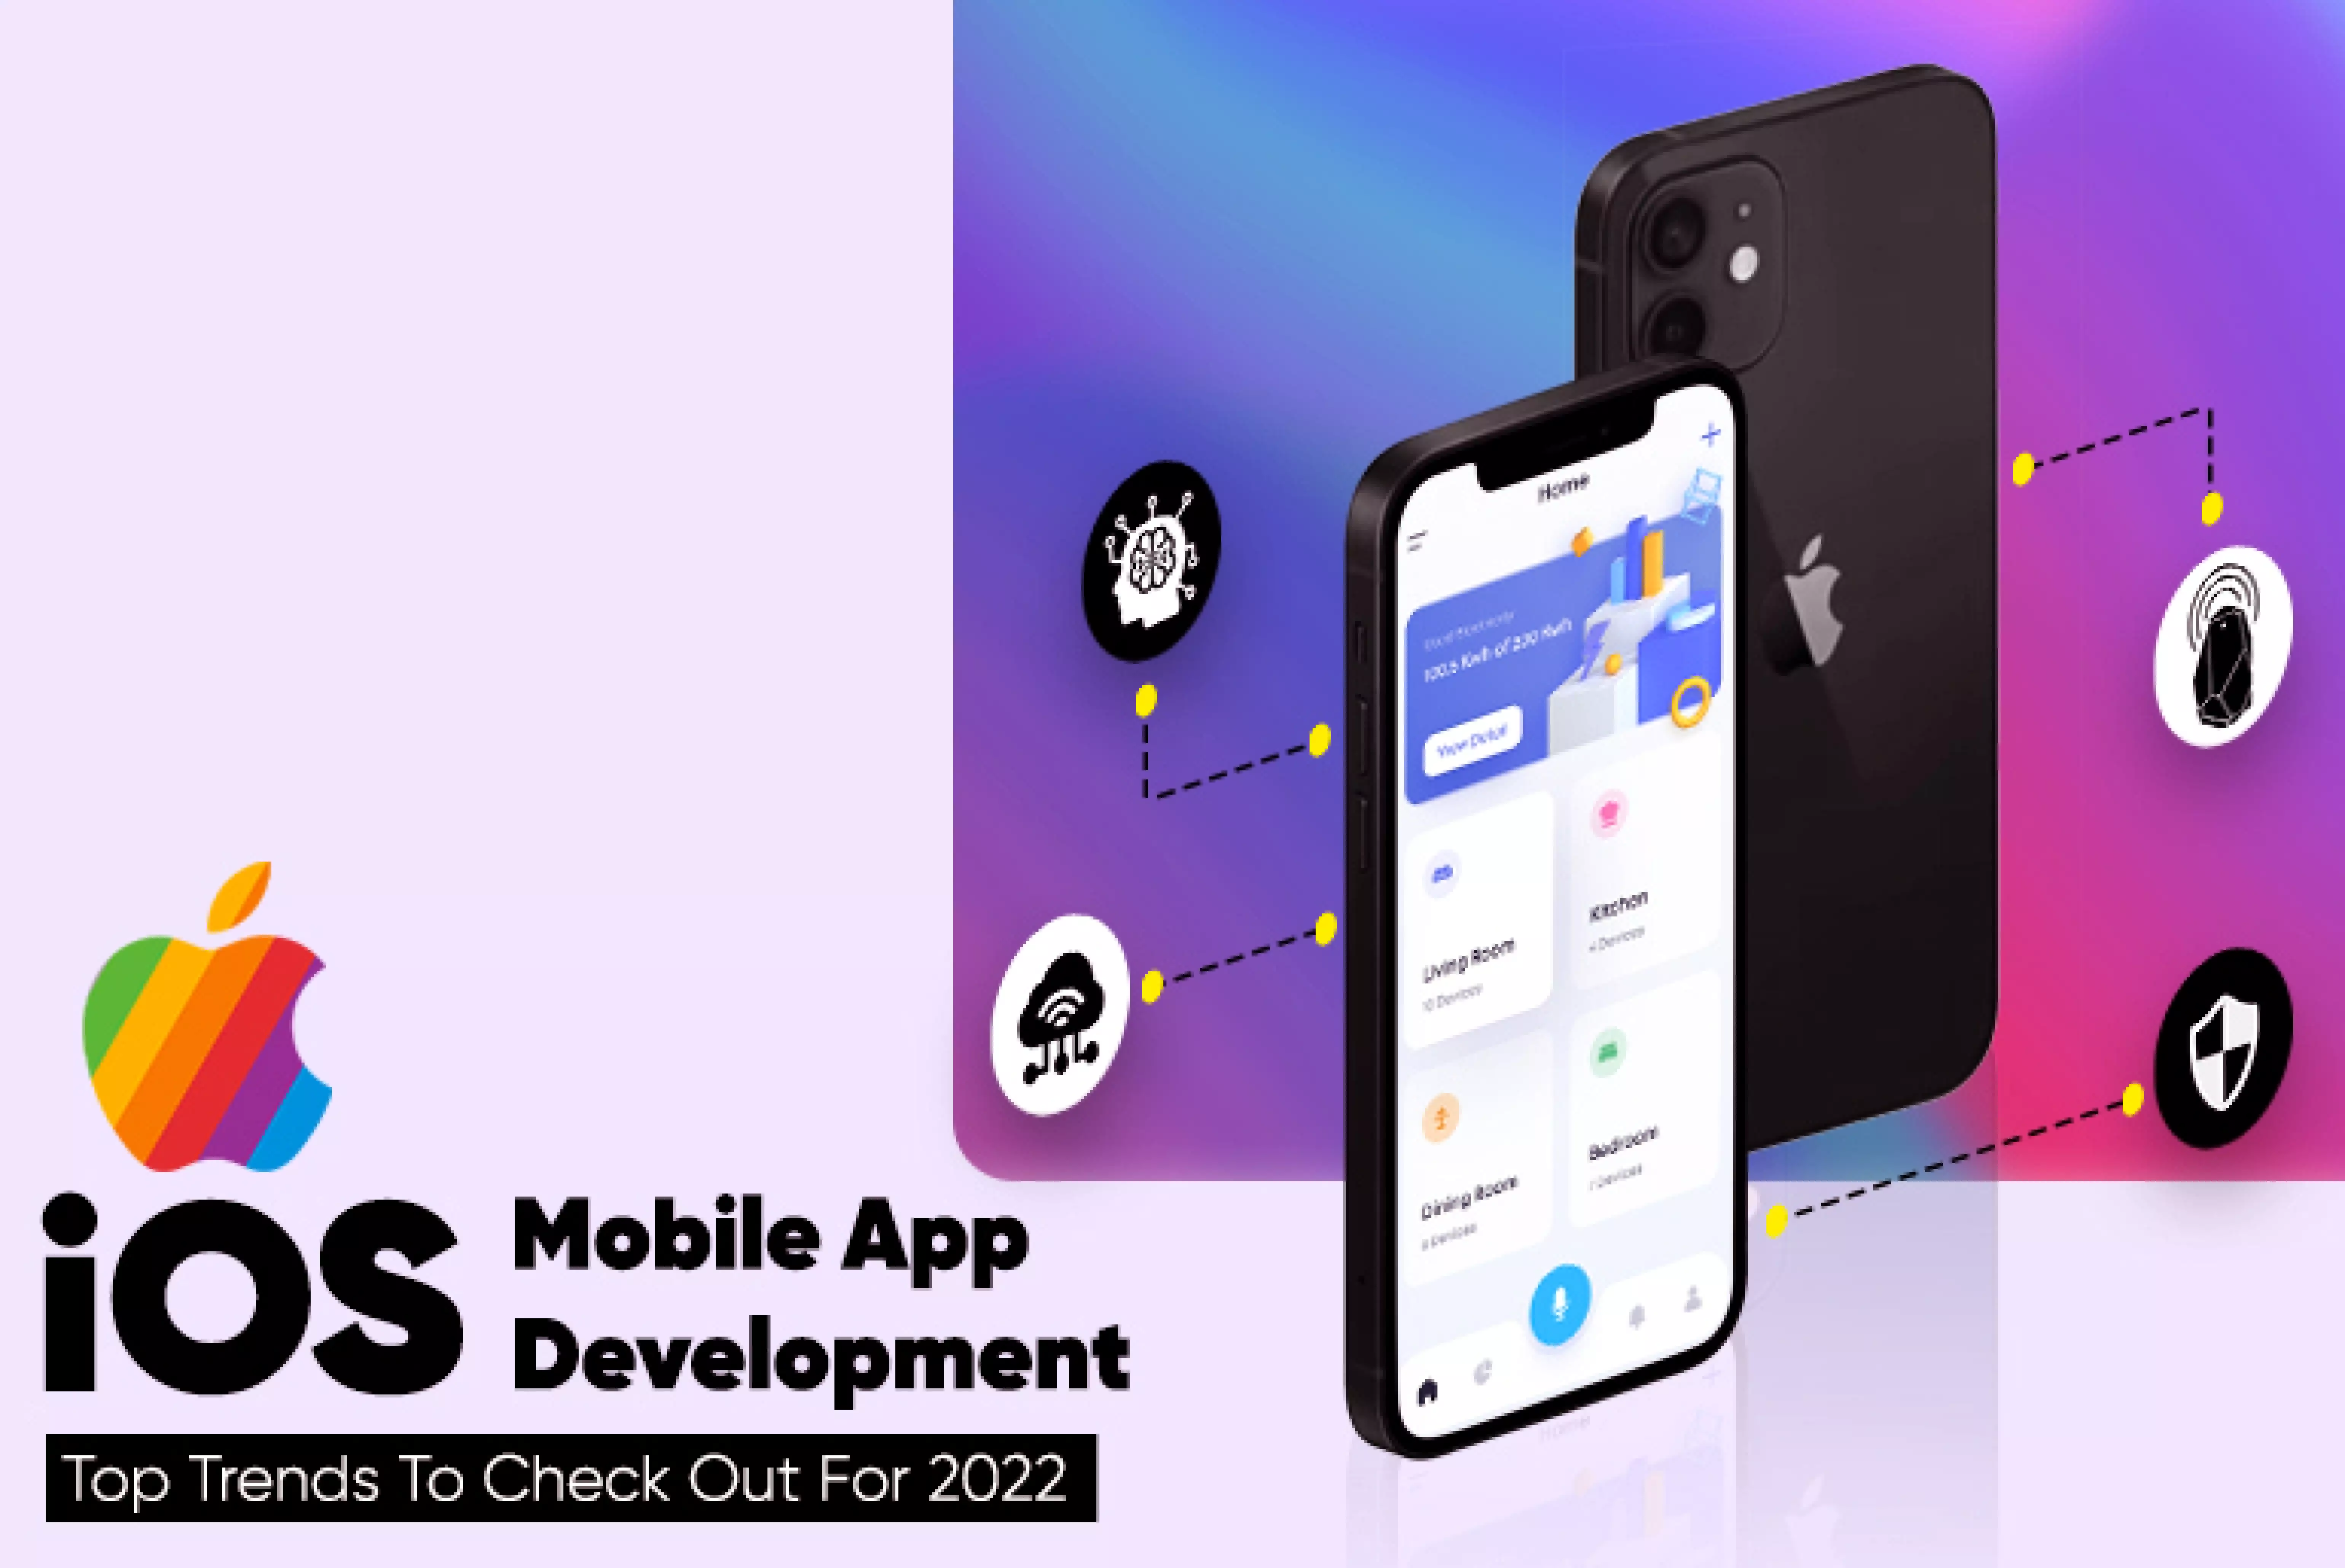 iOS Mobile App Development – Top Trends To Check Out For In 2022_Thum